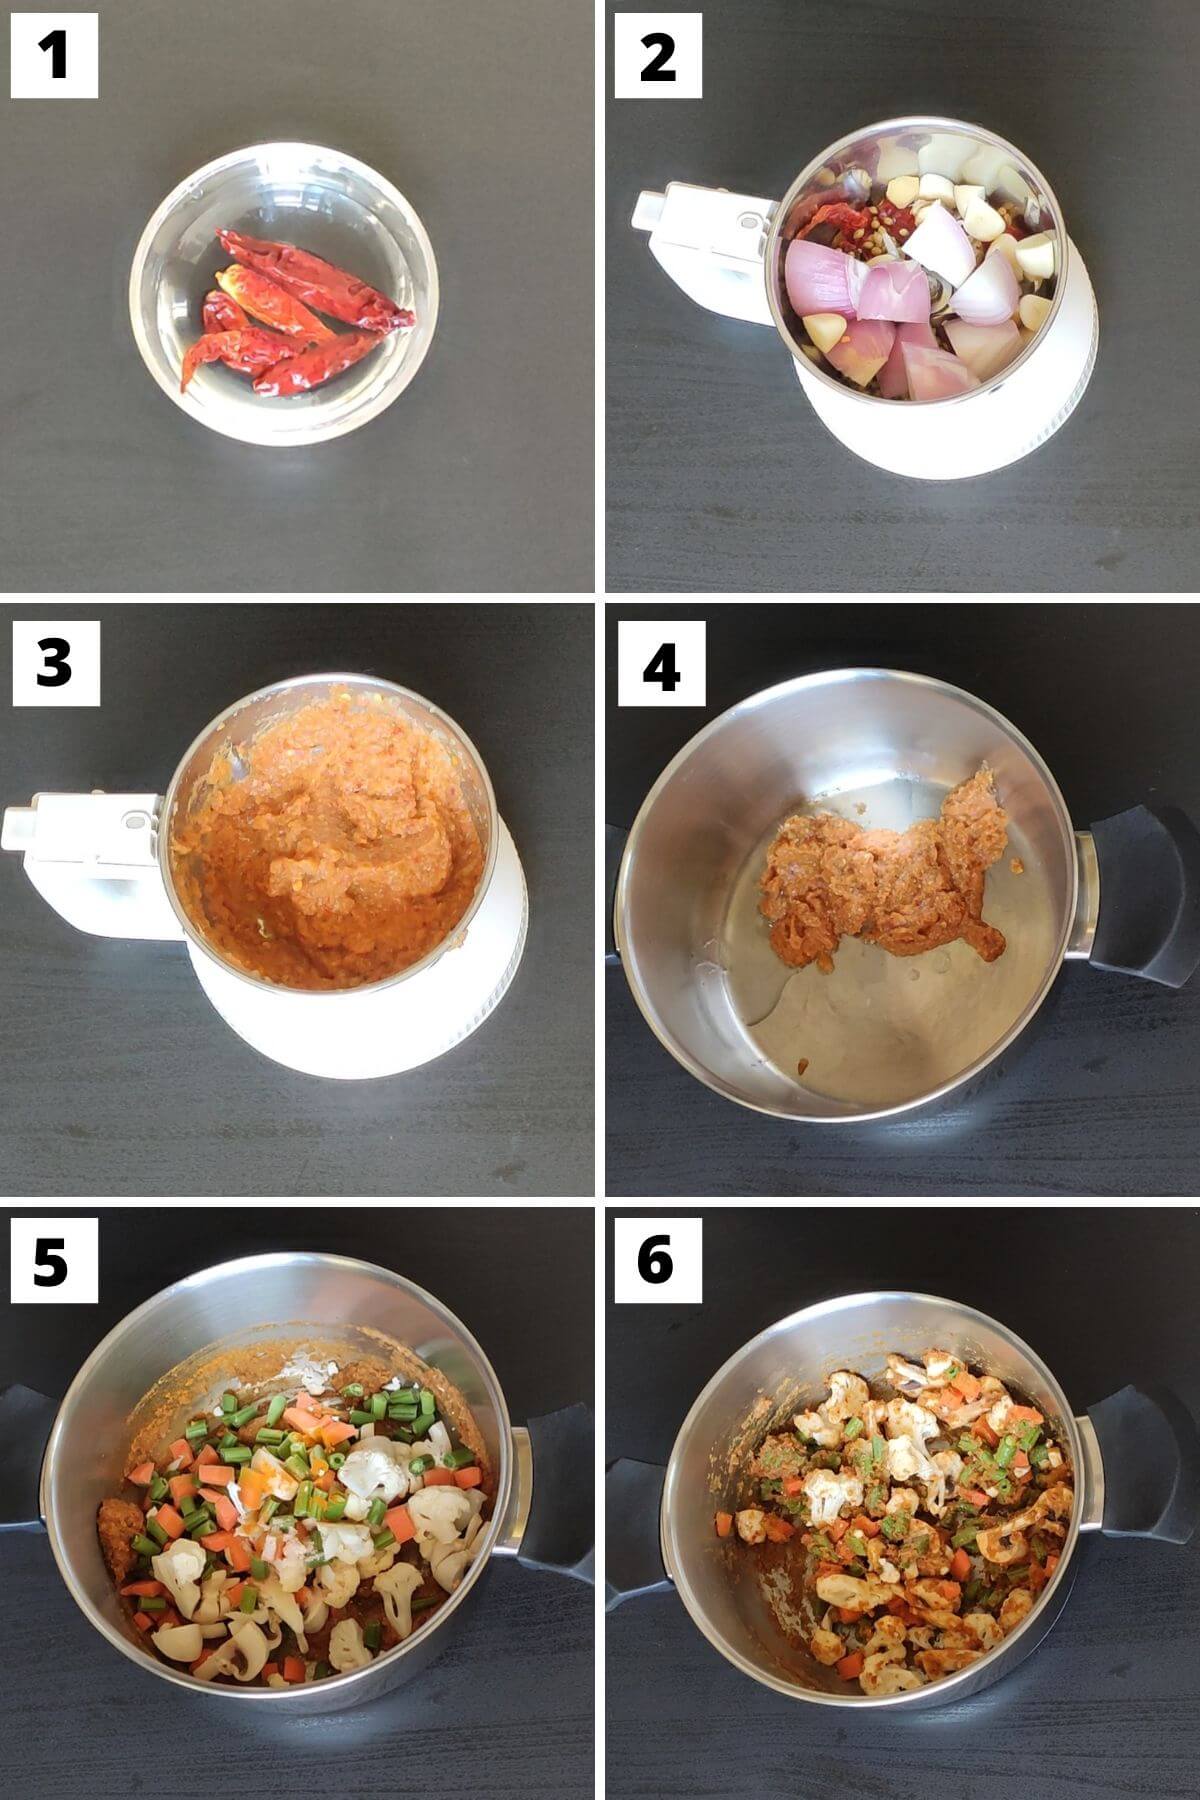 Collage of steps 1 to 6 of vegetarian khao soi recipe.